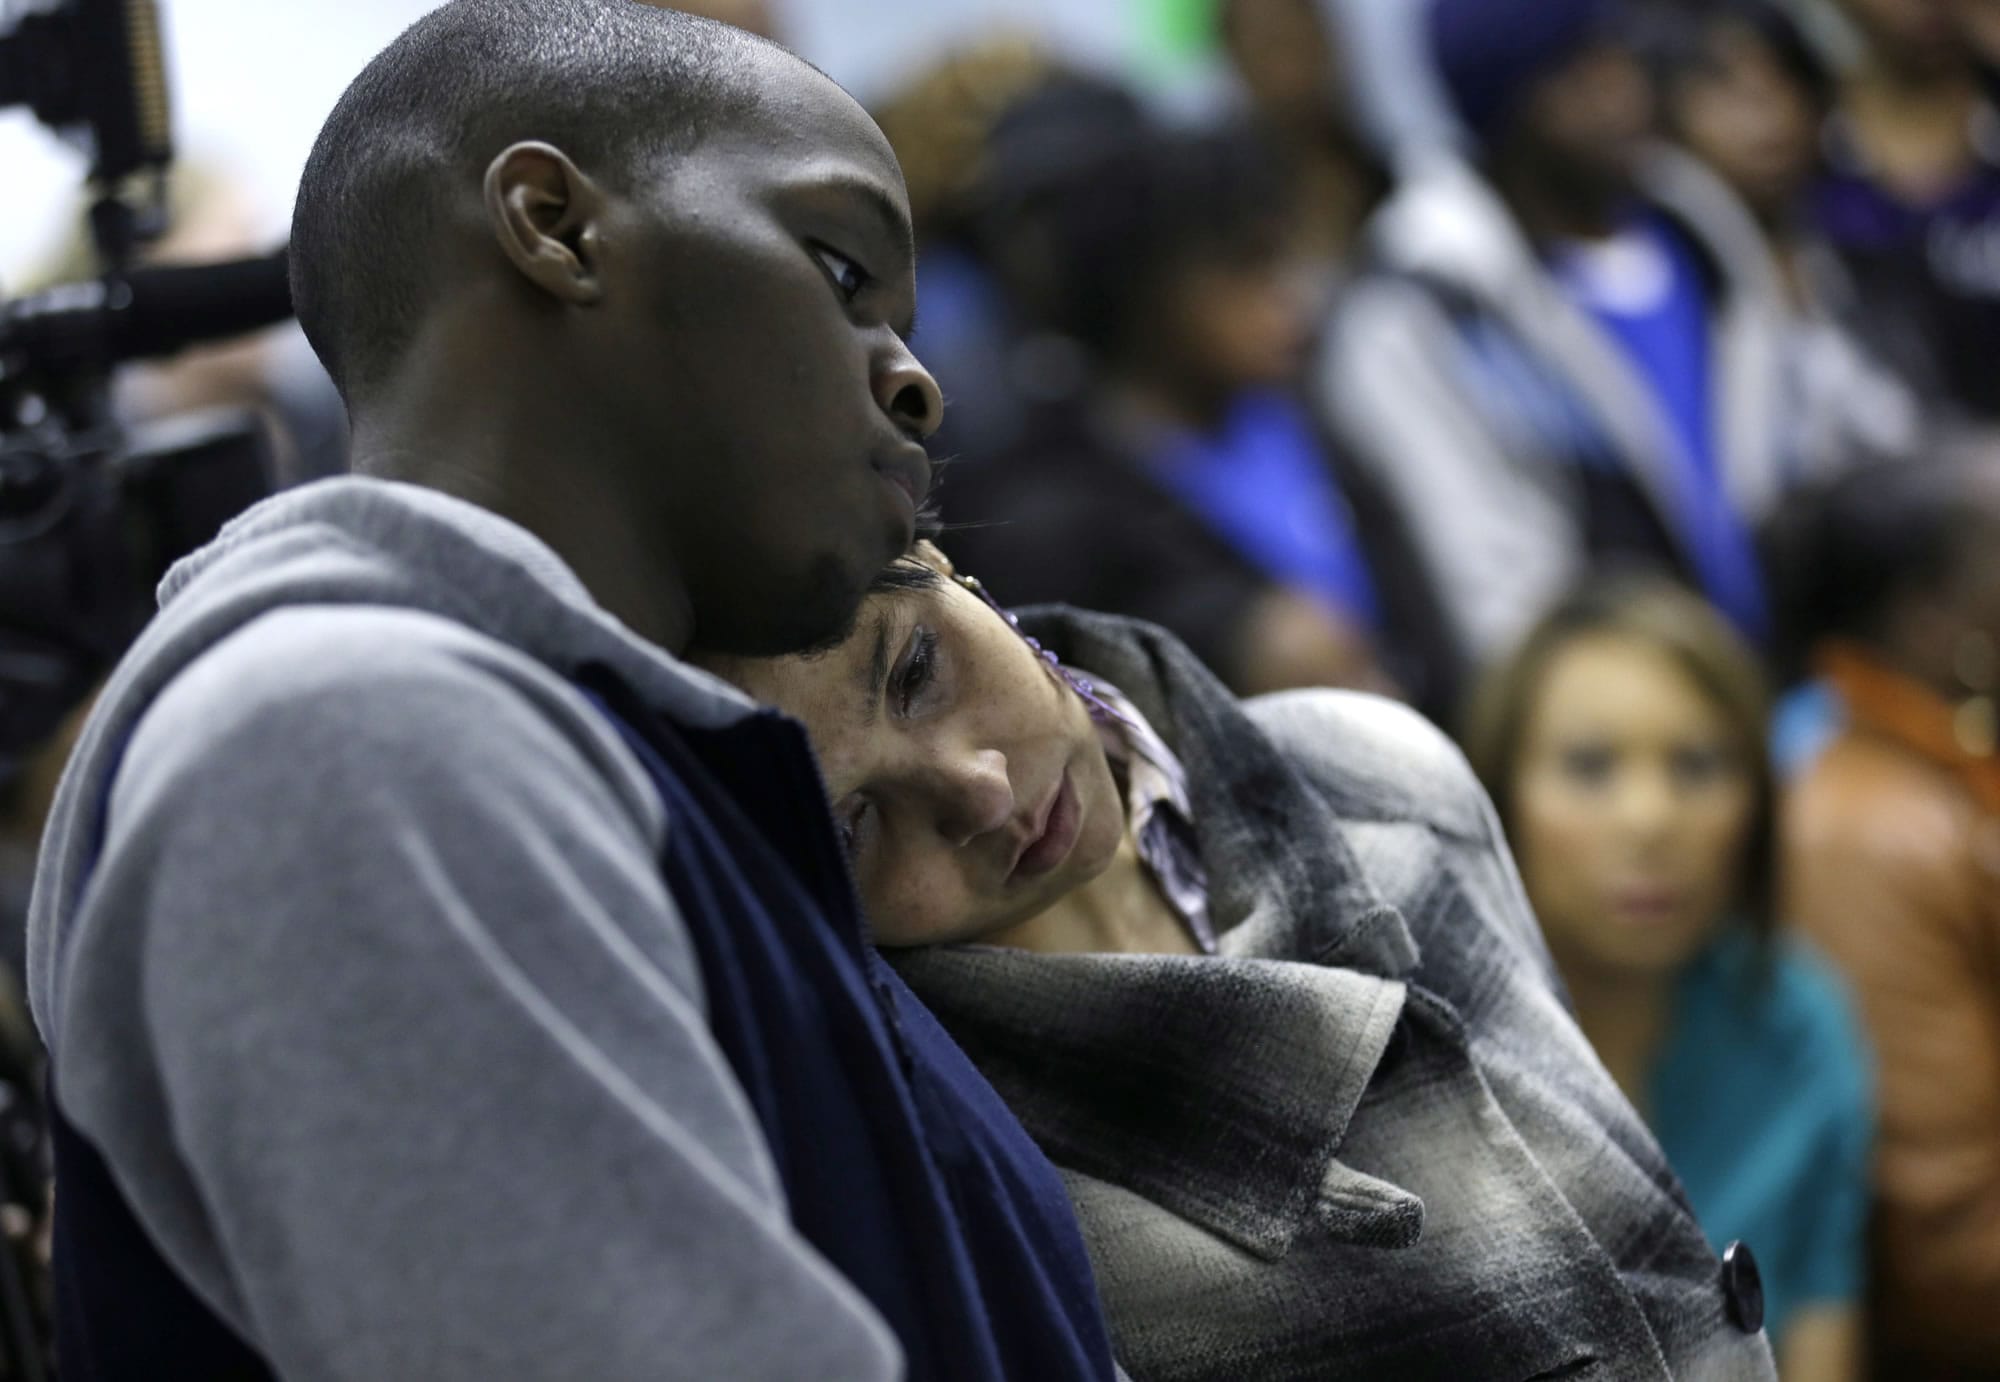 Adrean Bennett, brother of accident victim Andrique Bennett, and Charlene Blackwell hug during a prayer meeting Monday in Warren, Ohio.